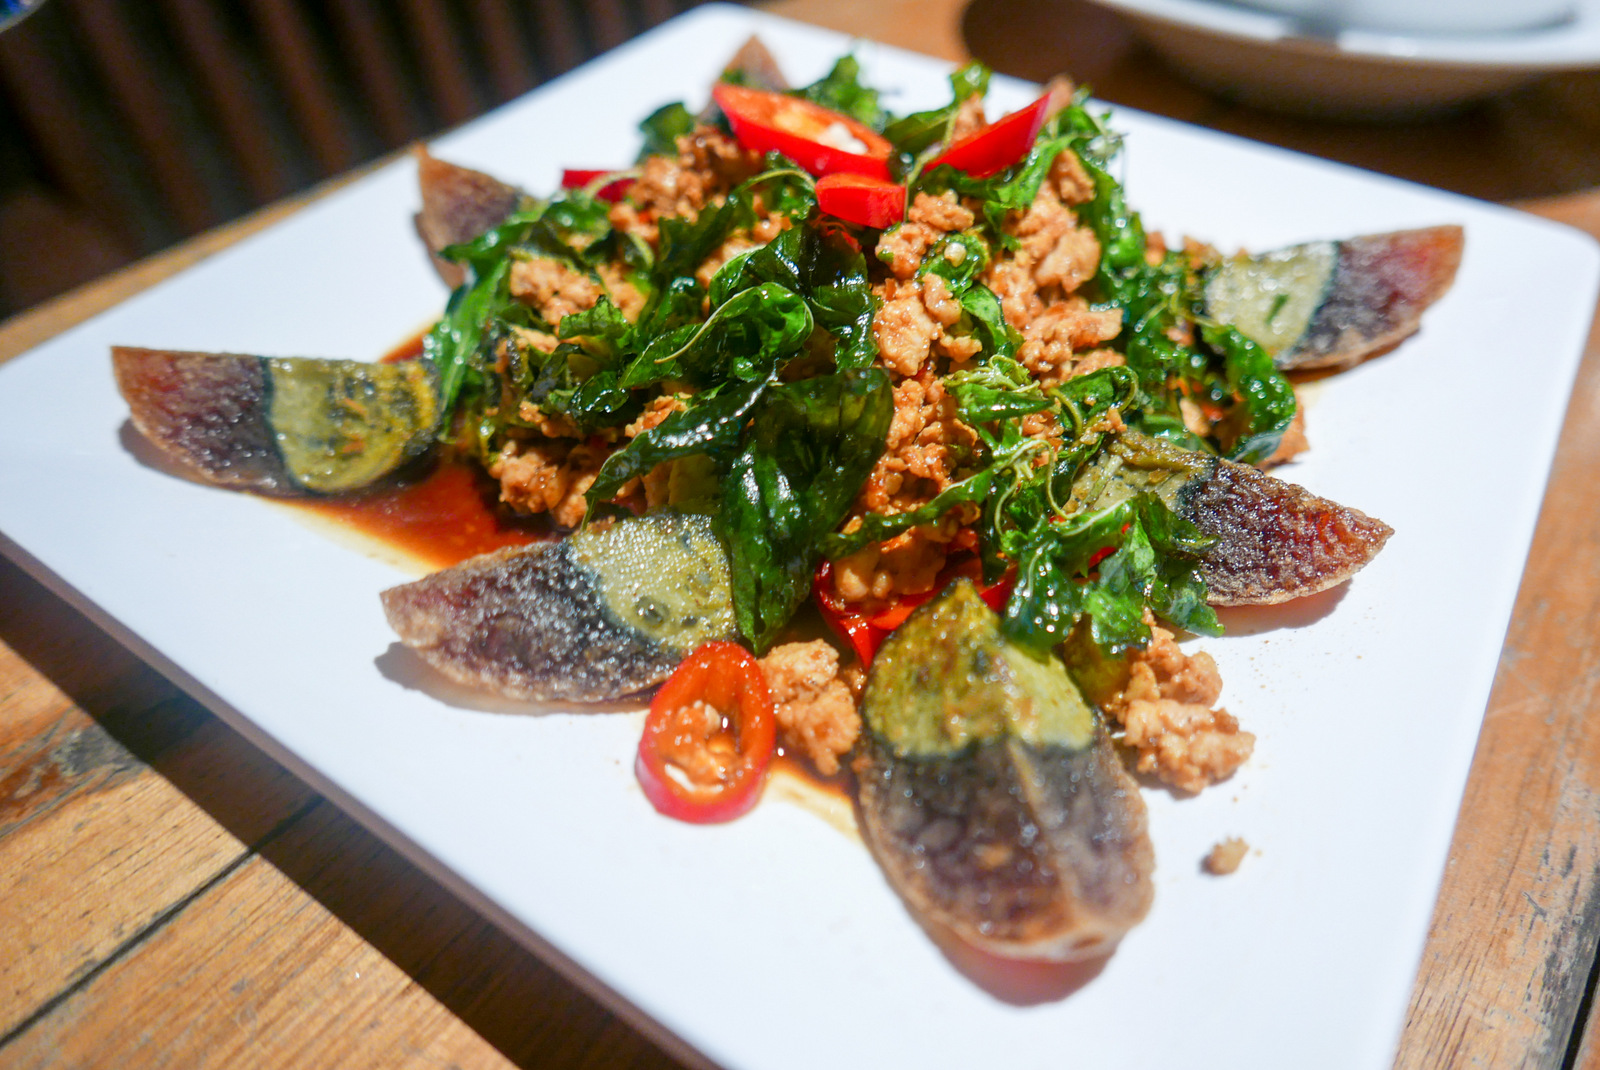 6. Ma-Ni Thai - century egg with minced chicken